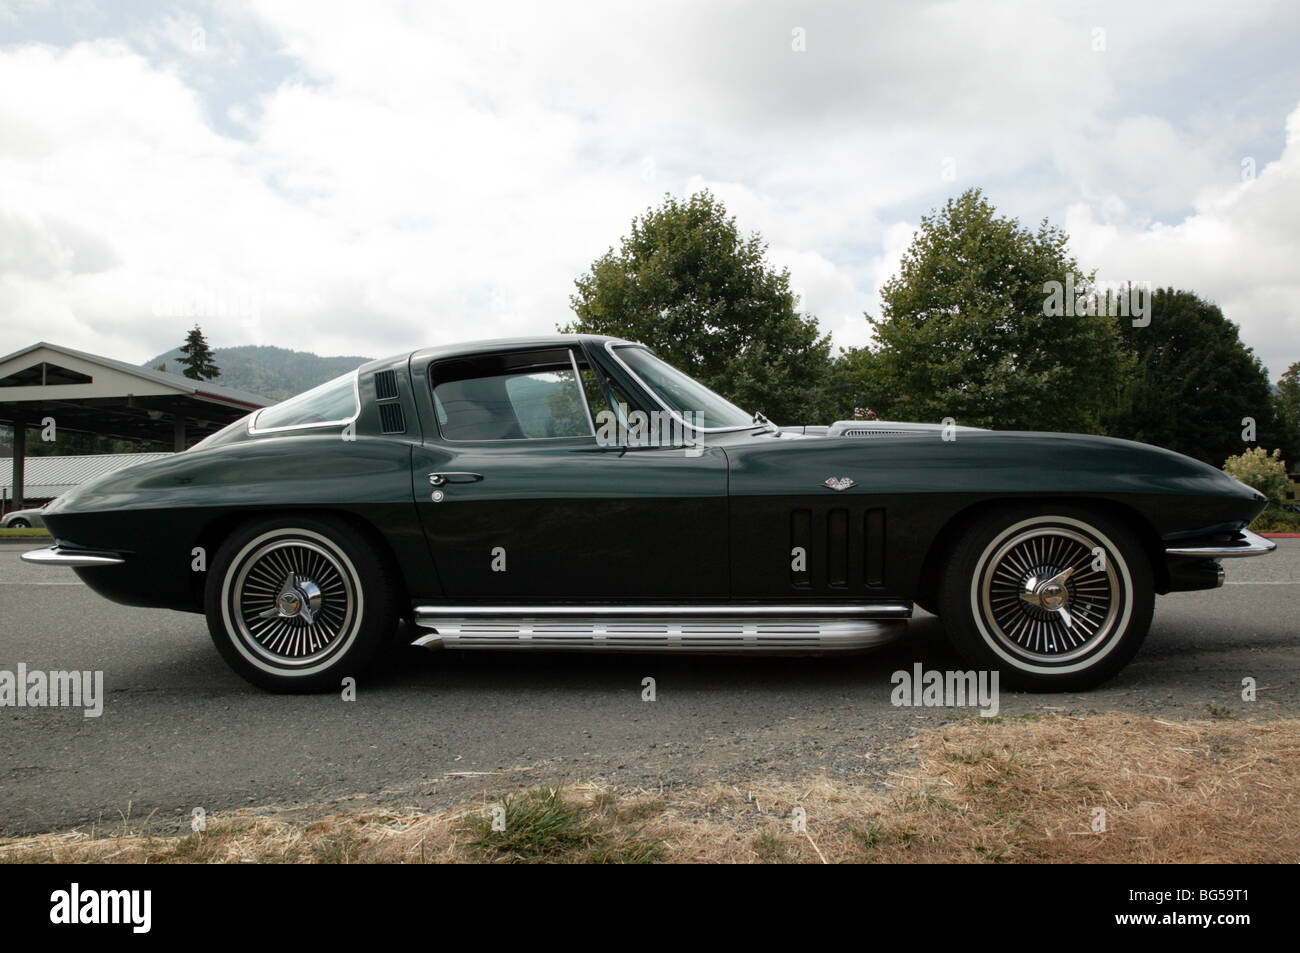 Second Generation 1965 Corvette Sting Ray Fuel Injected  Roadster Stock Photo